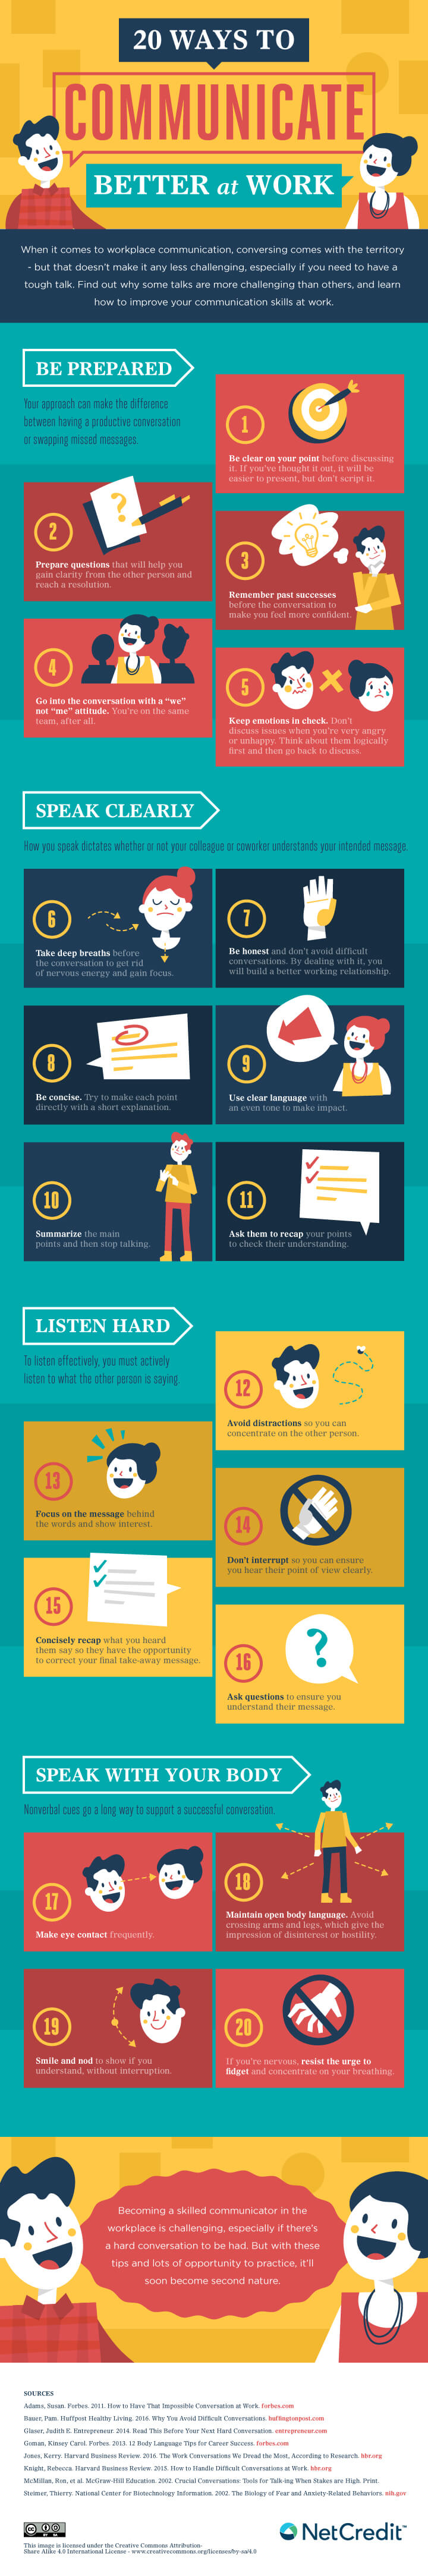 20 Ways to Communicate Better at Work Infographic